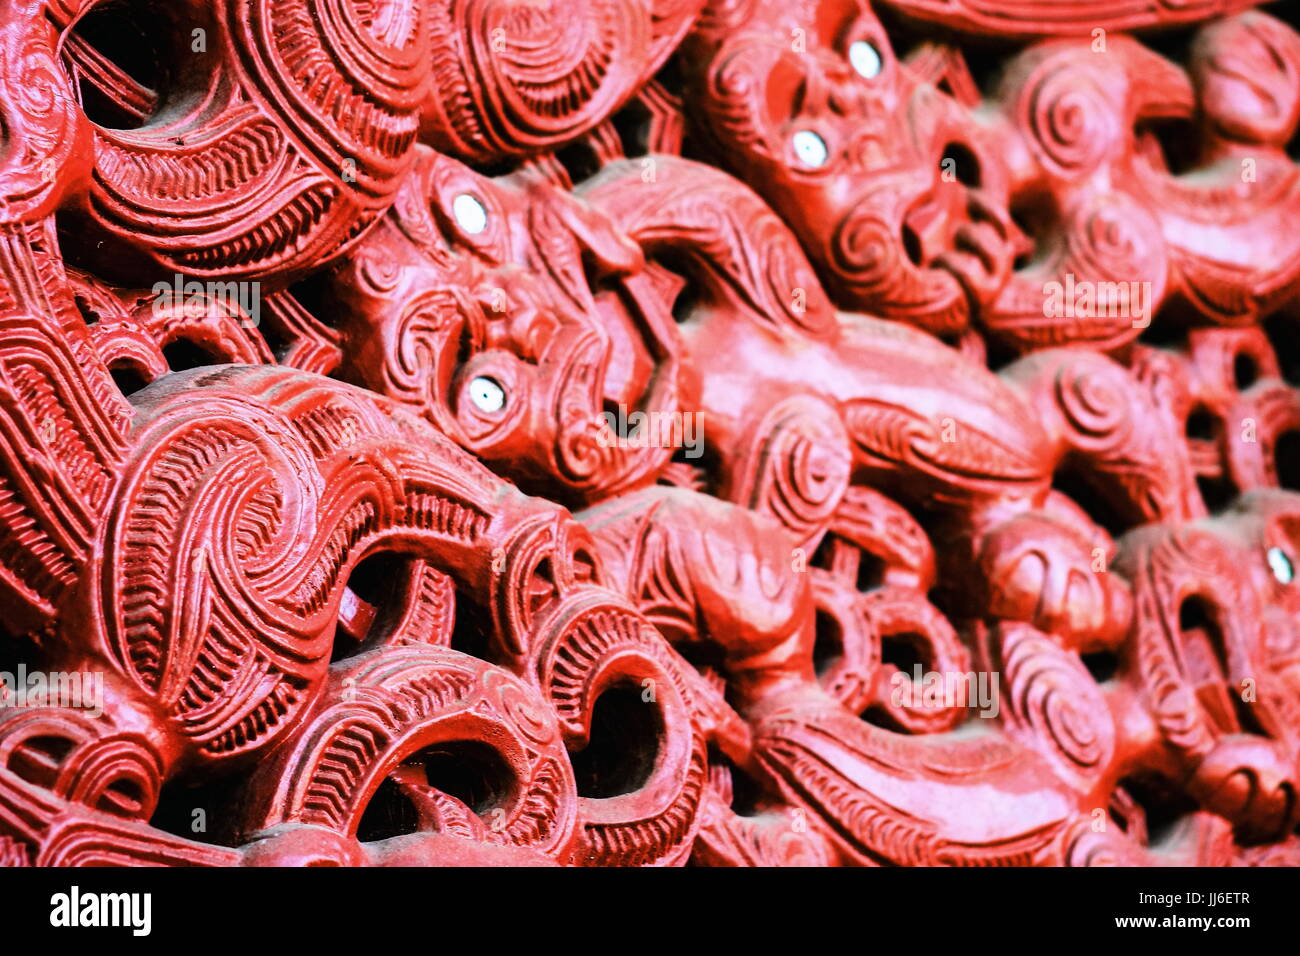 Honolulu, Hawaii - May 27, 2016:Close up image of Maori Carving inside the Aotearoa Village at the Polynesian Cultural Center. Stock Photo